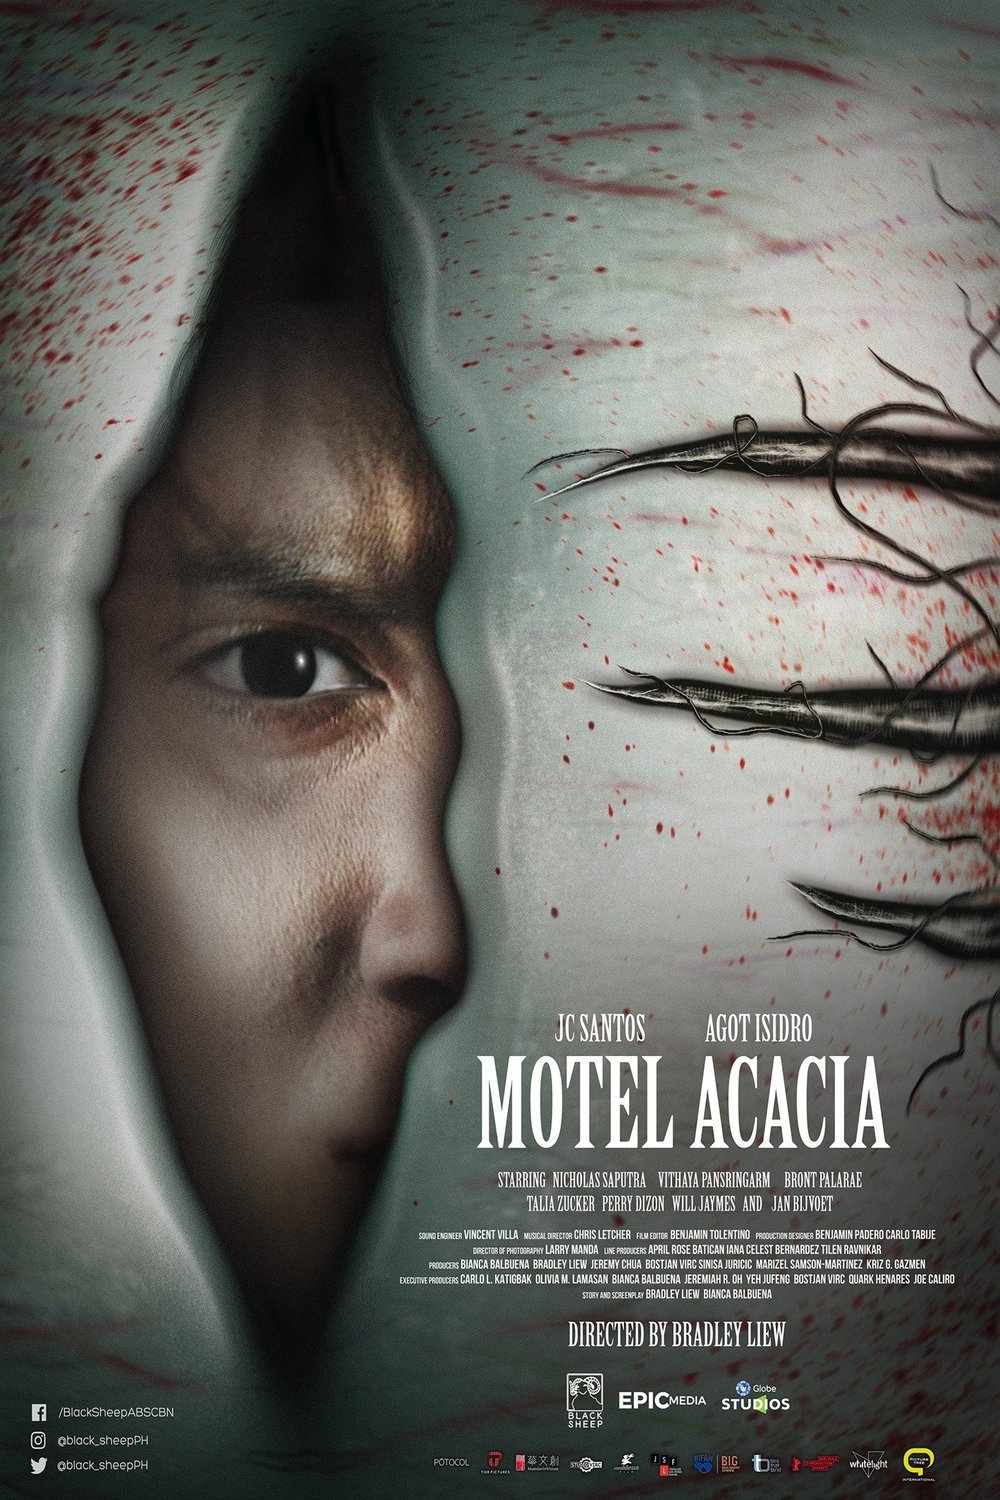 Poster of the movie Motel Acacia